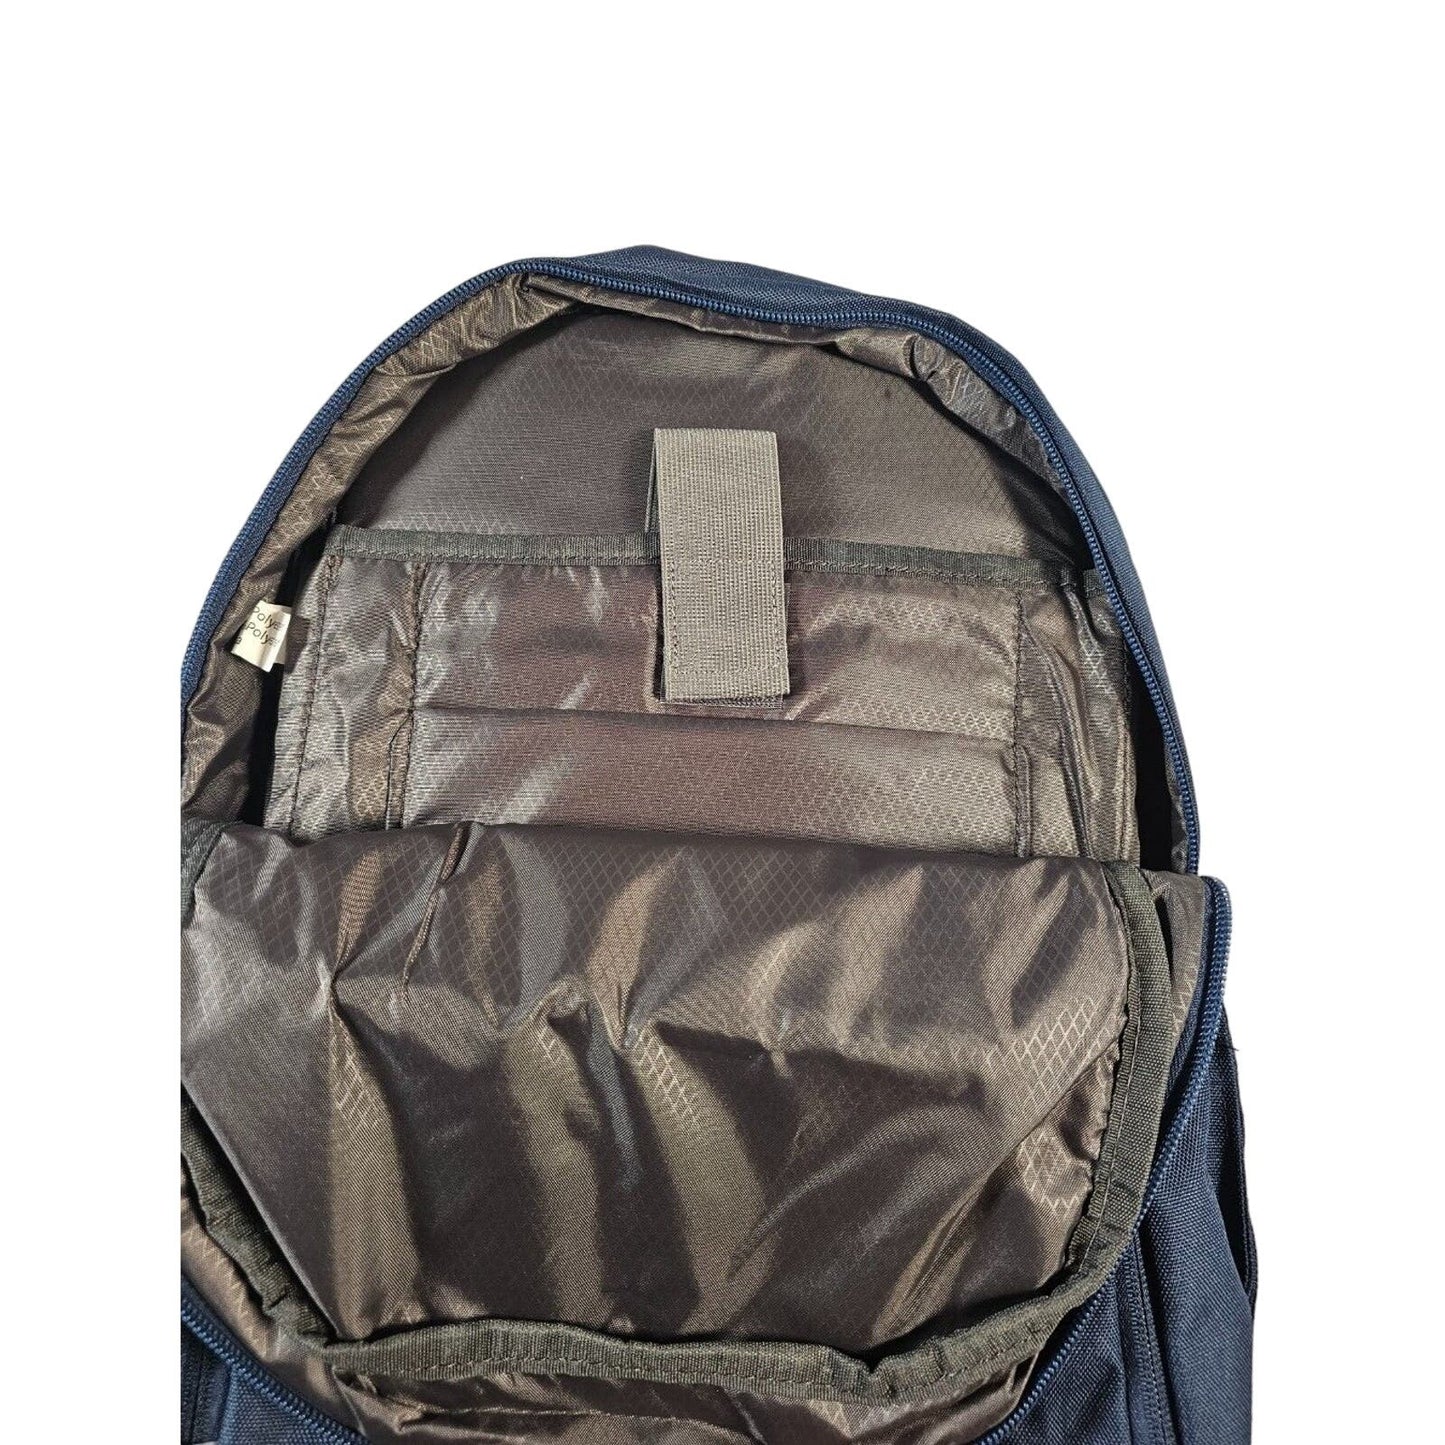 Made by Design Carry On Blue Backpack